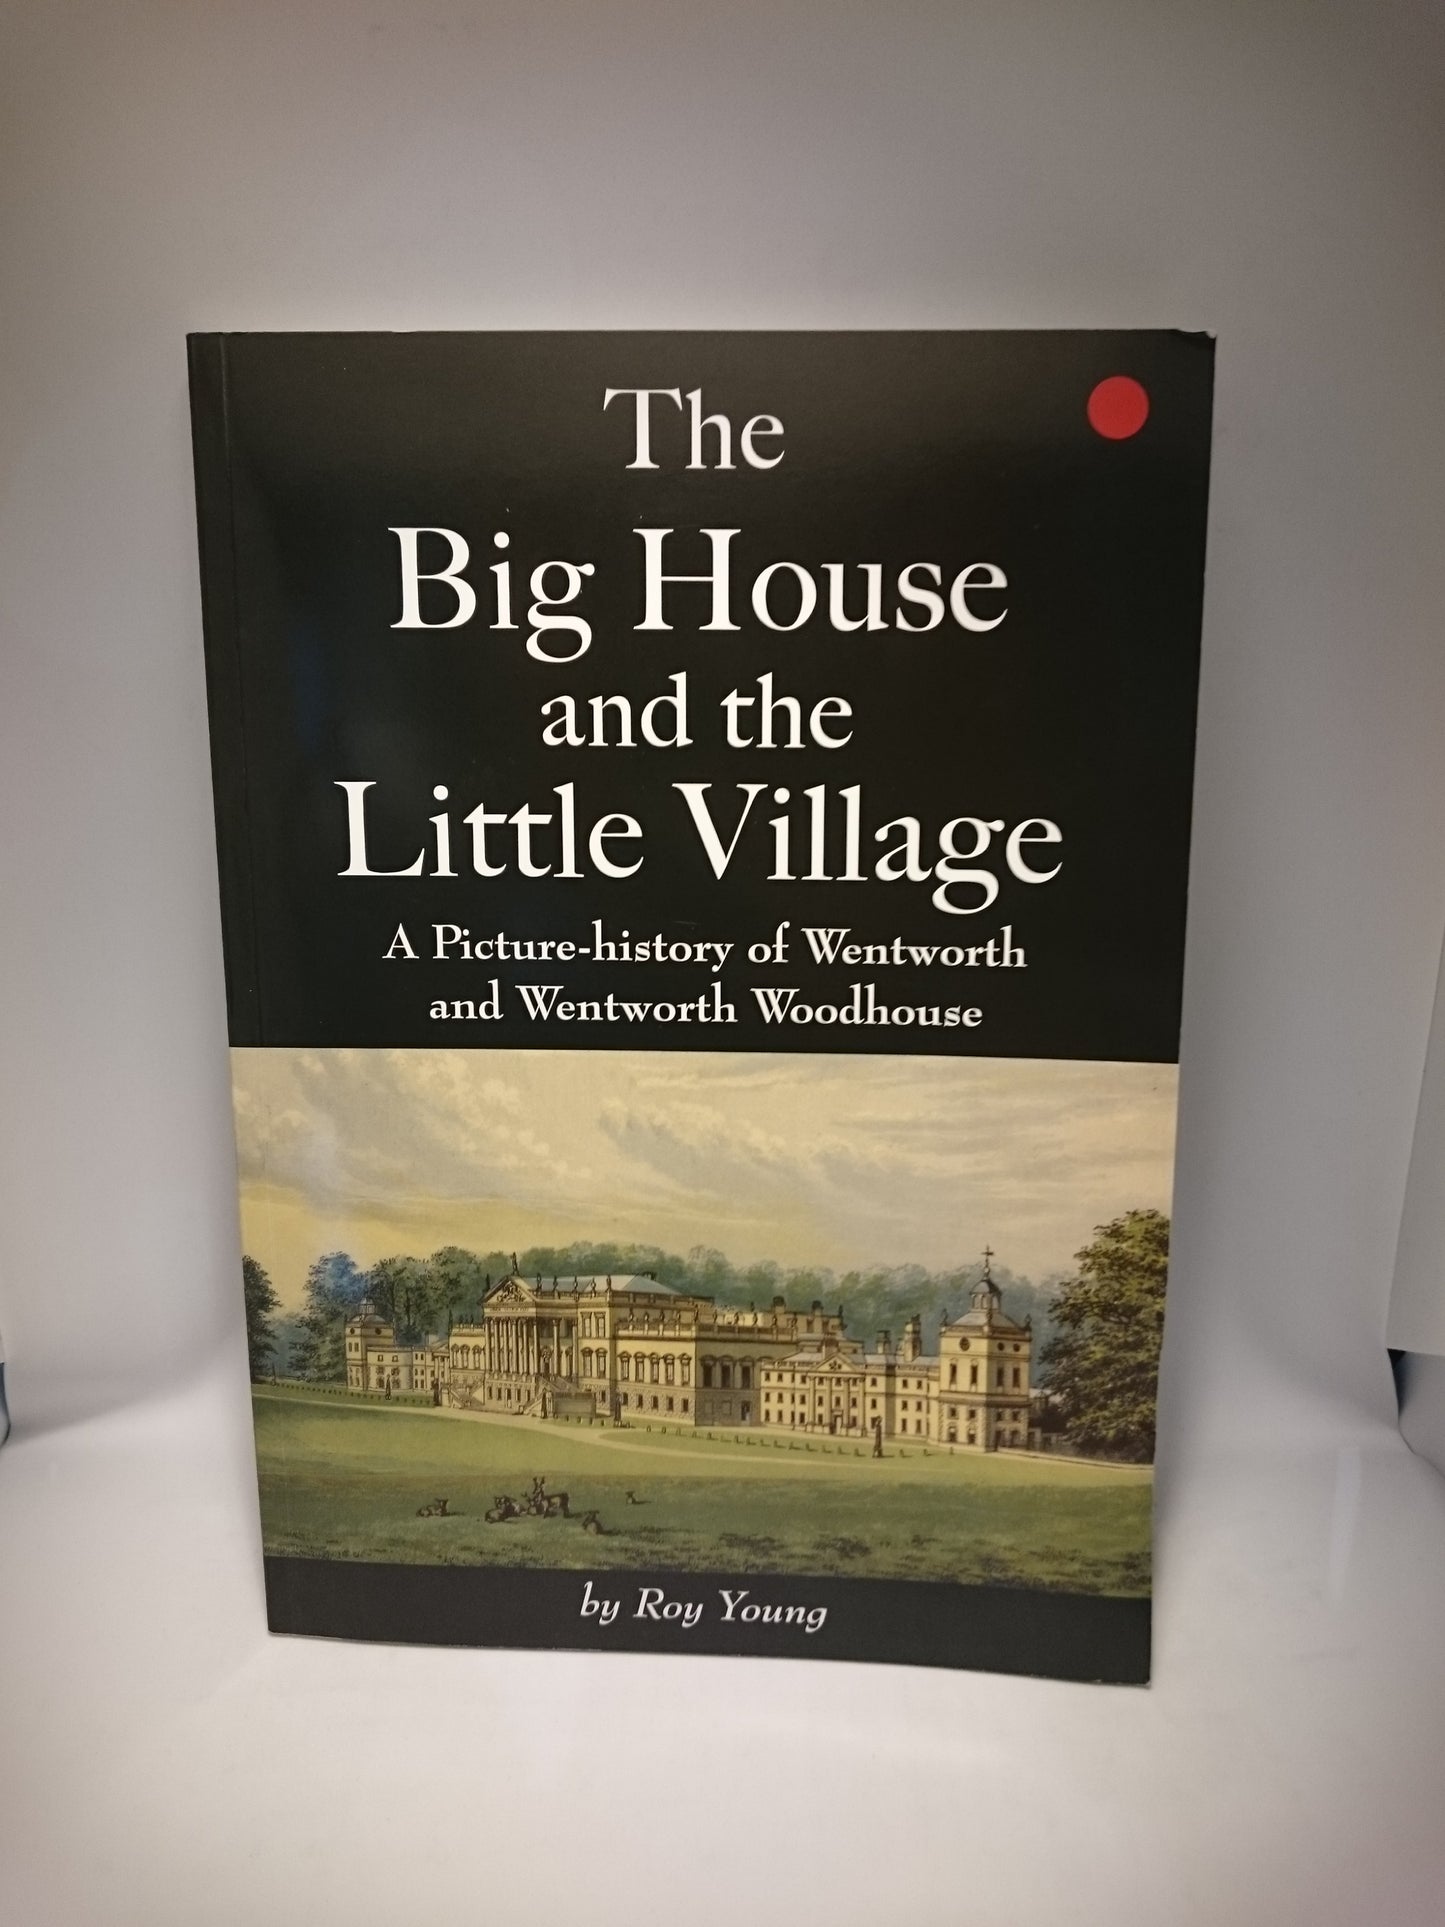 The Big House and the Little Village